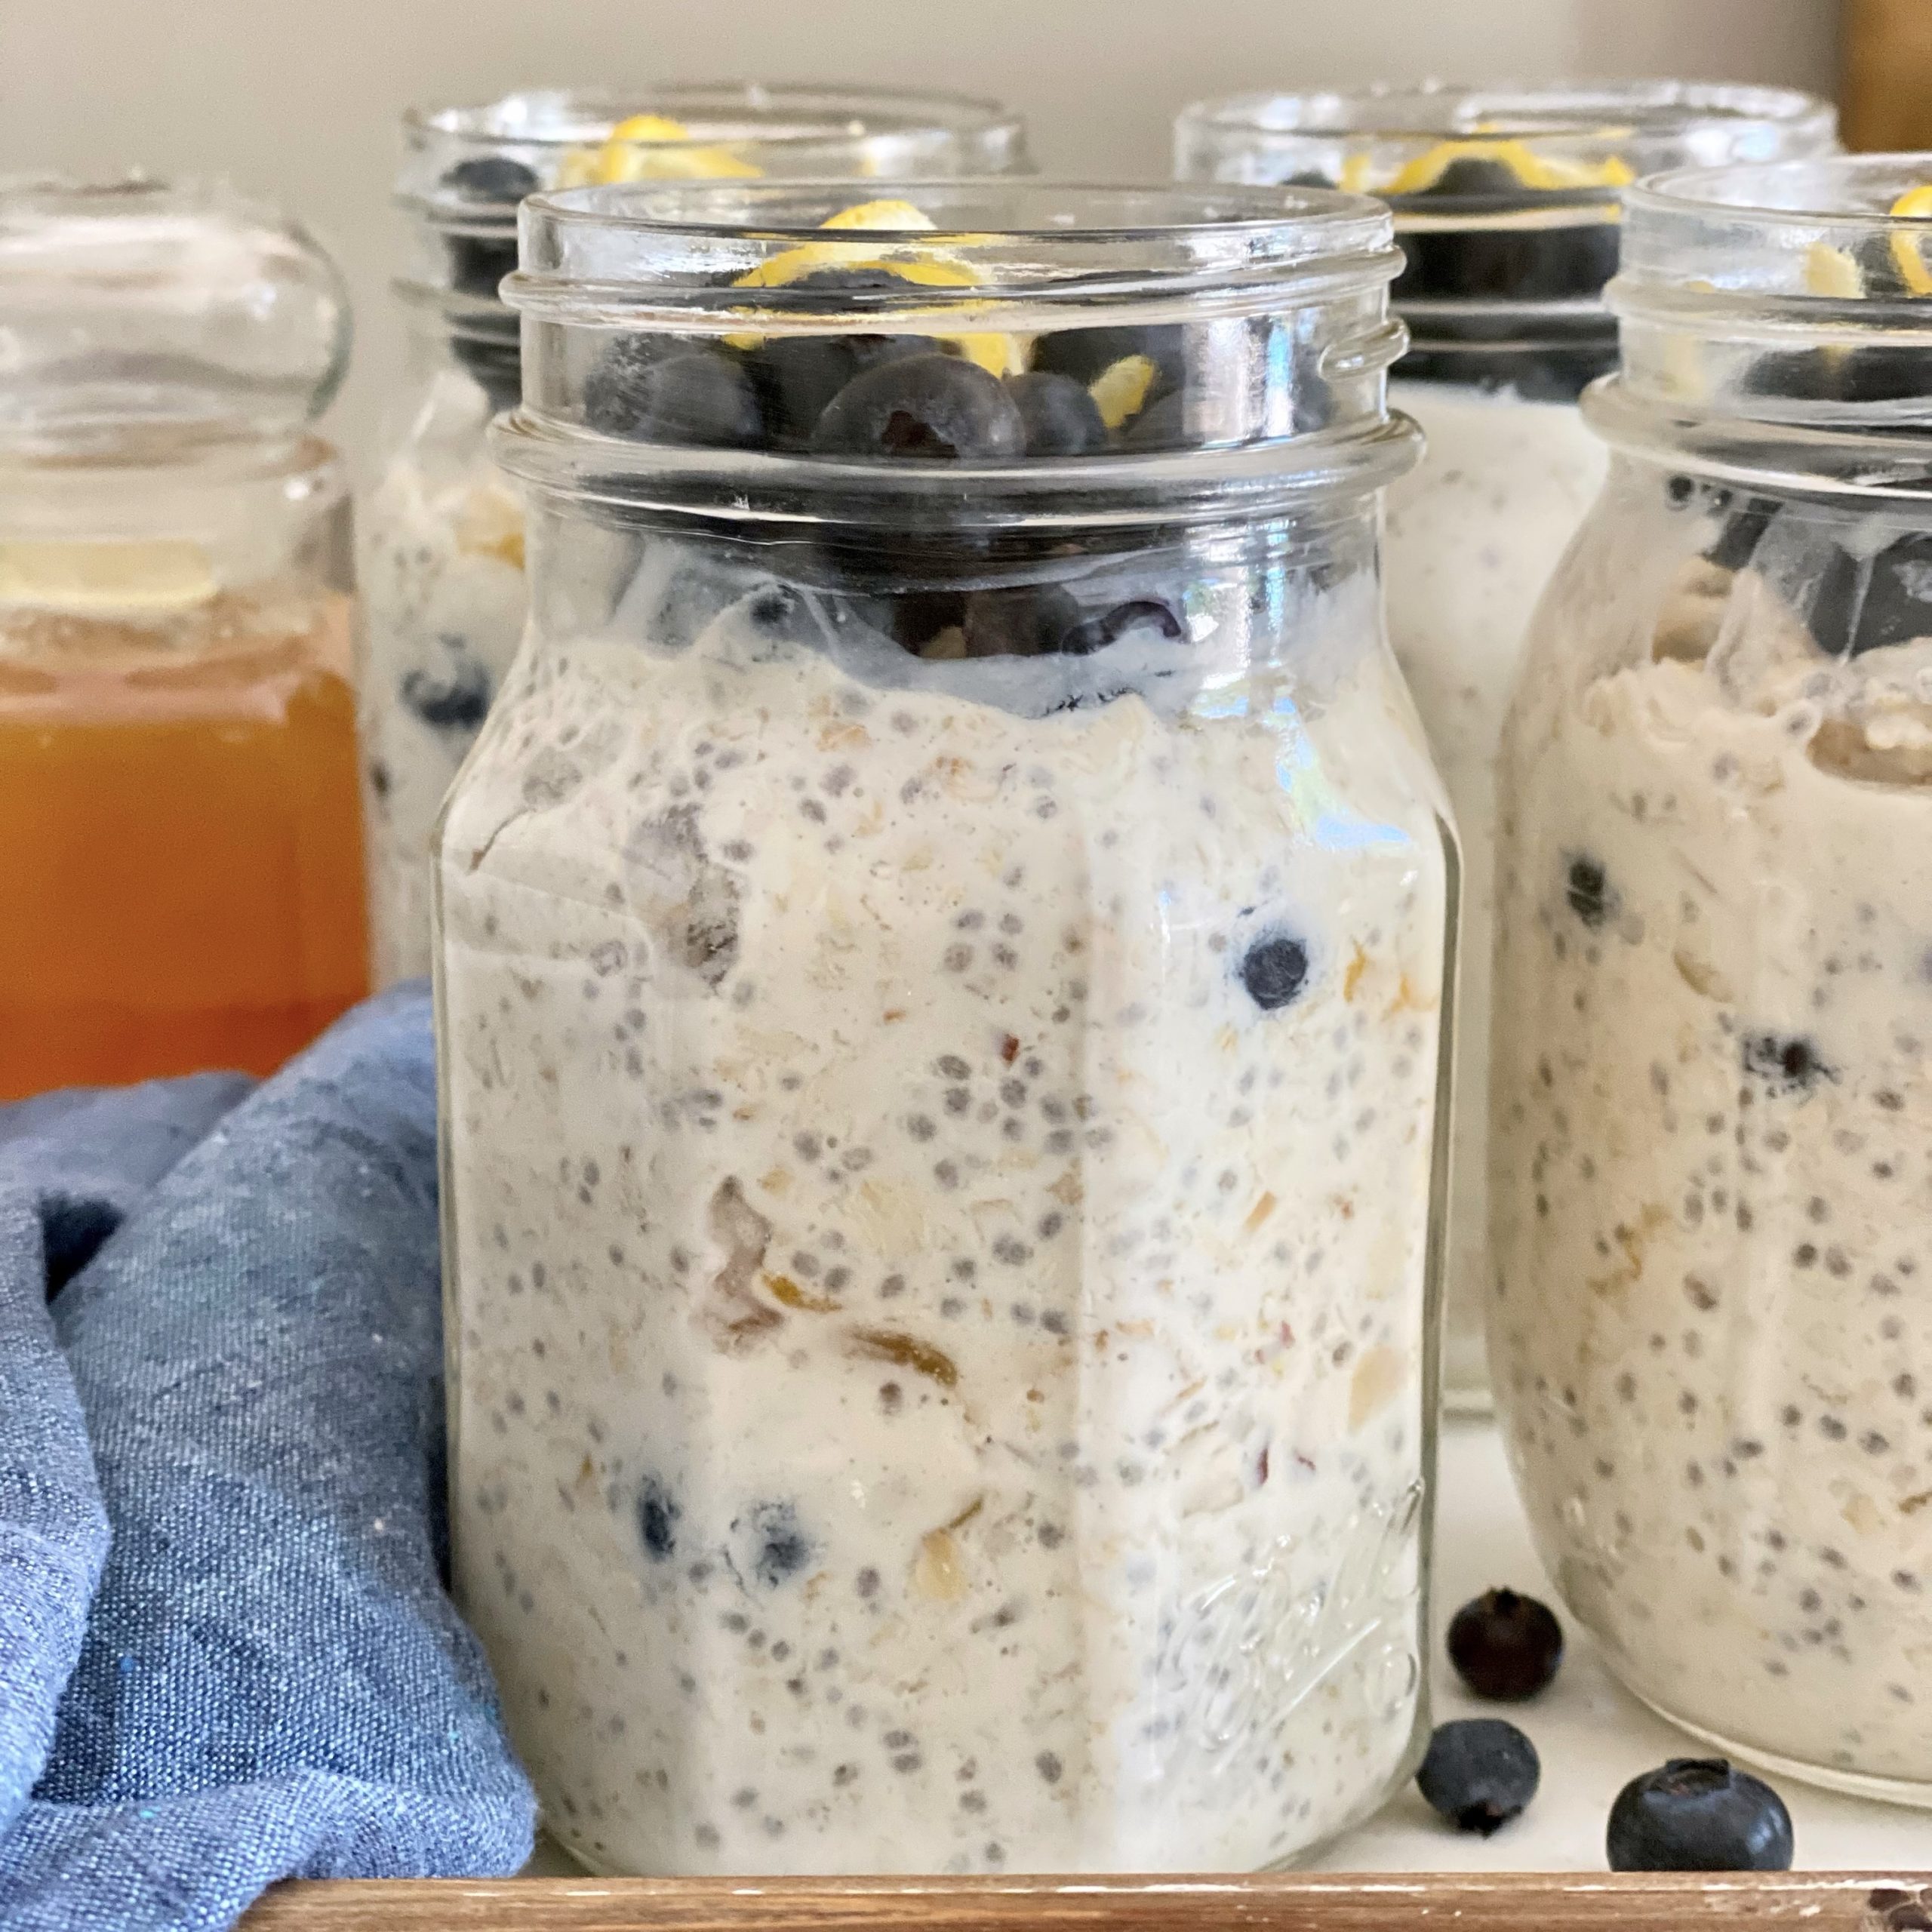 Overnight oats in a glass jar on a tray with a blue napkin and honey.